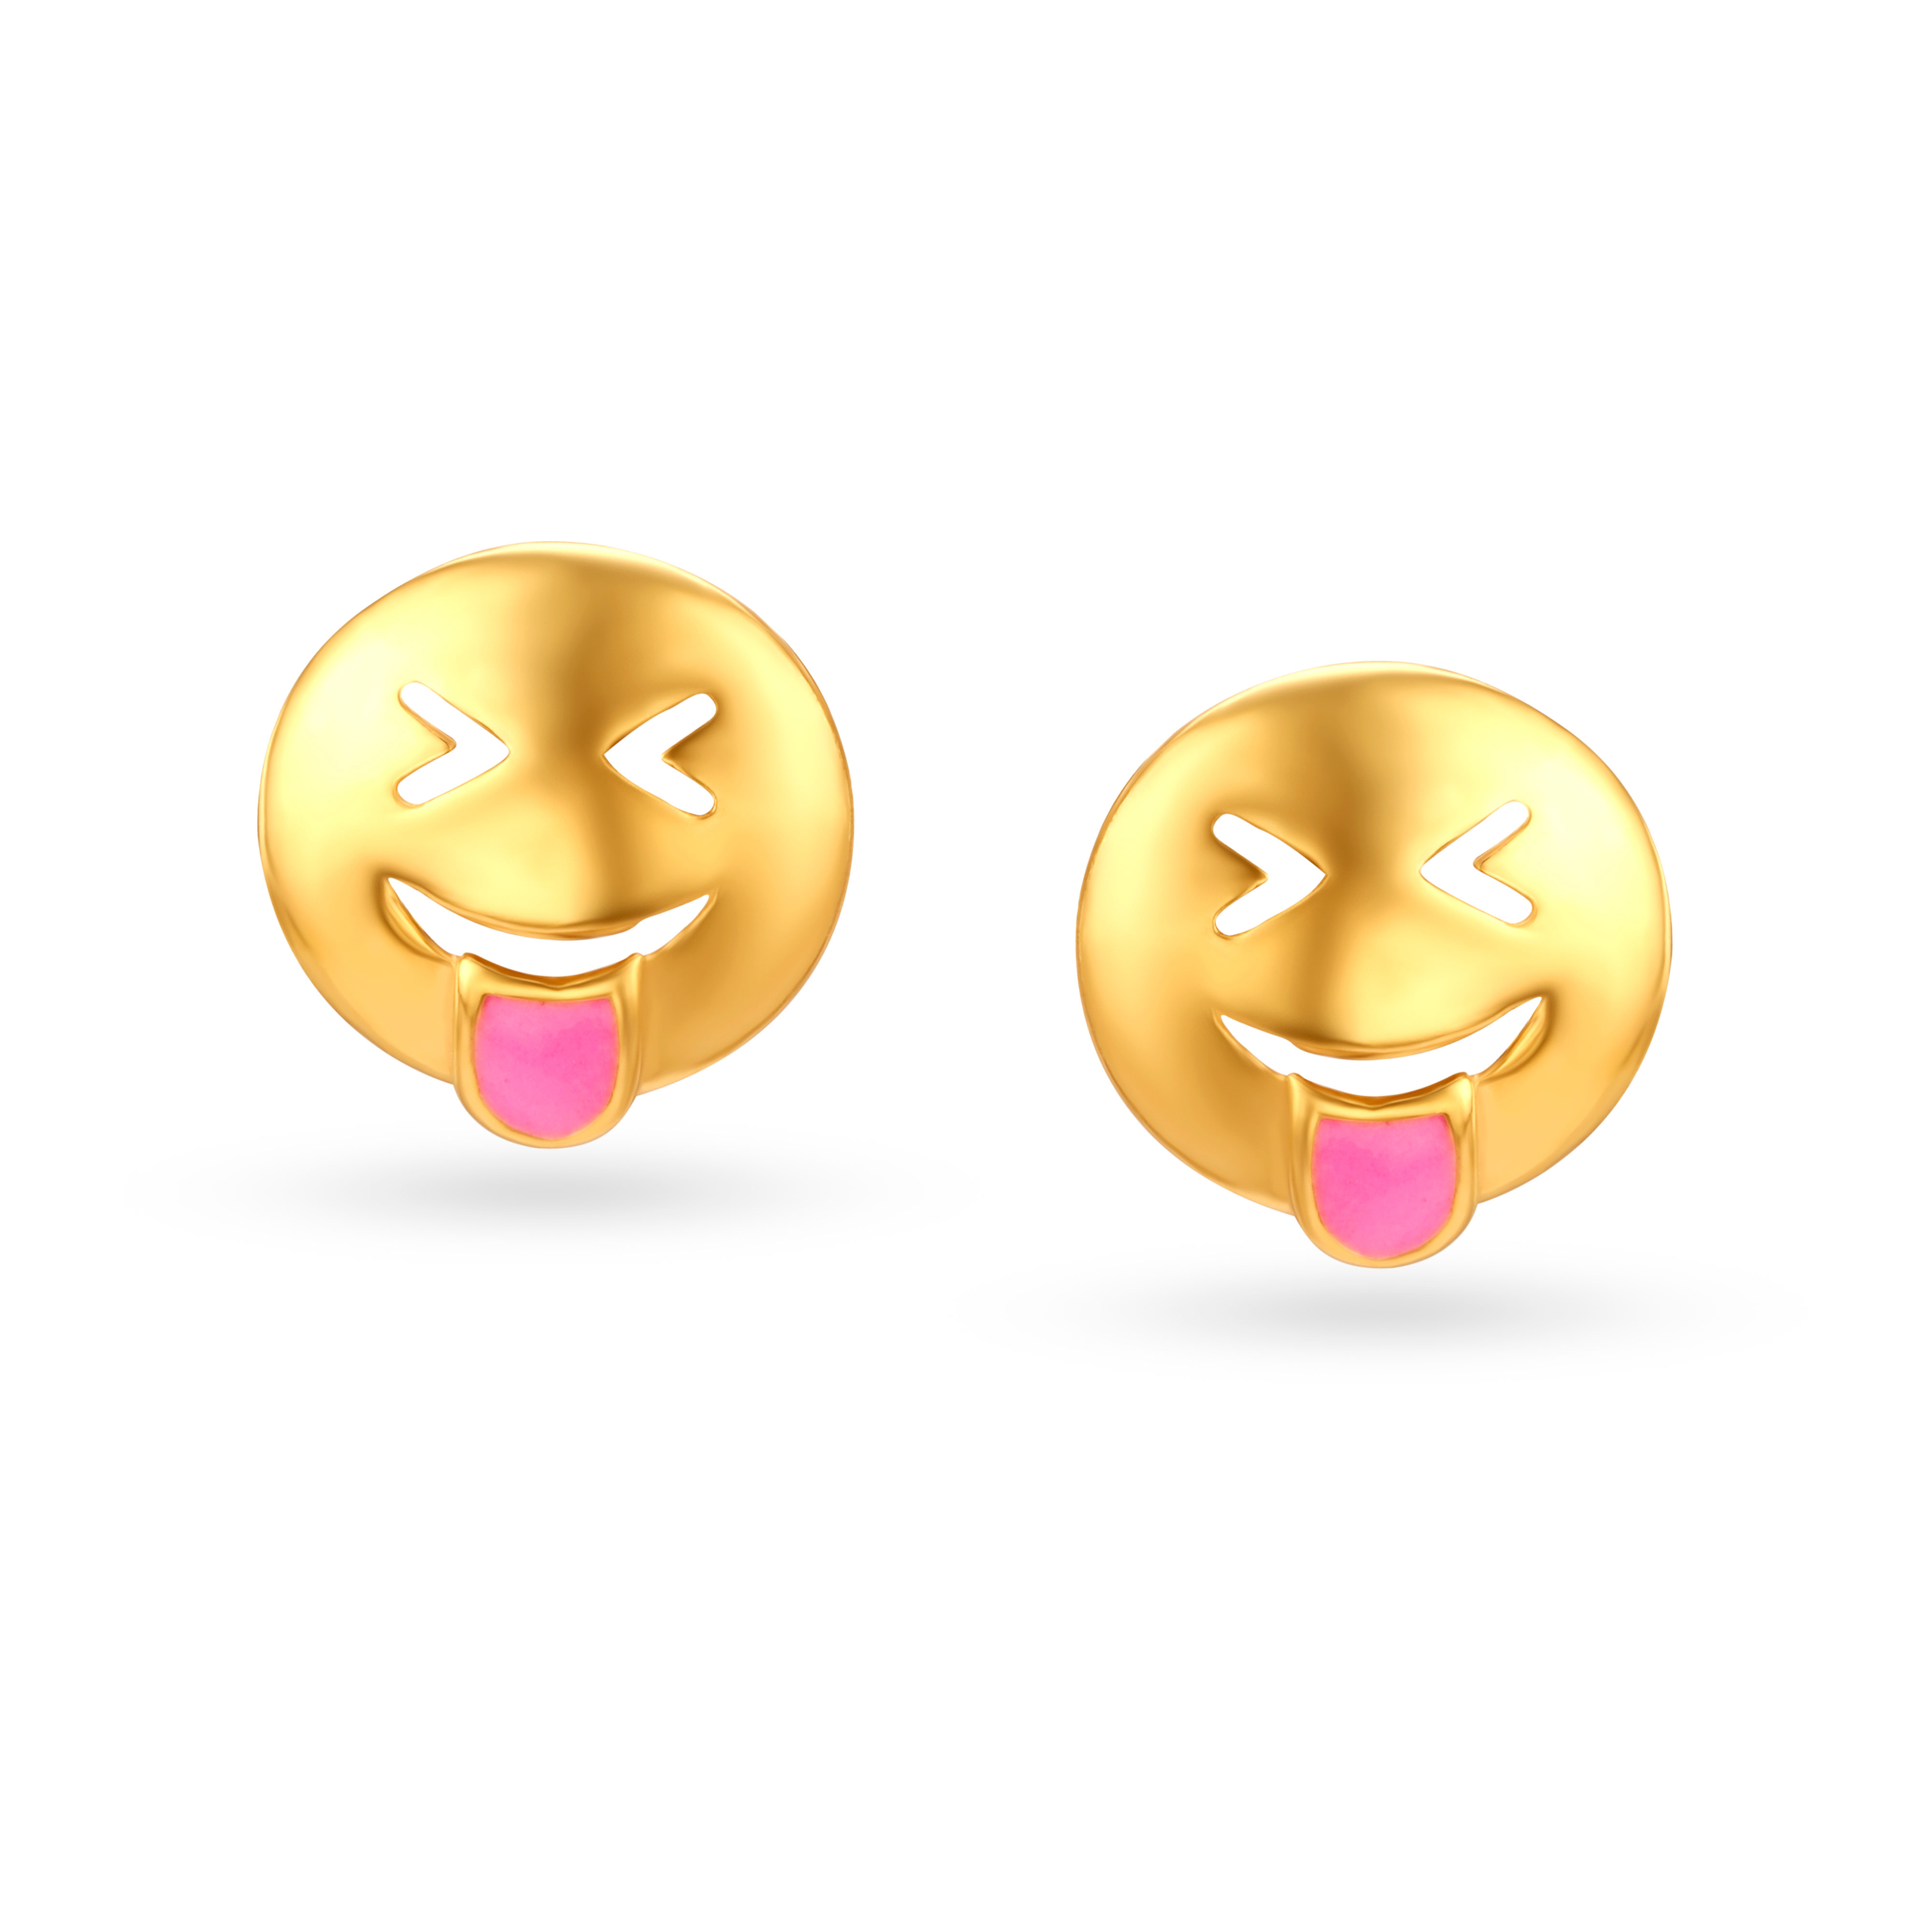 Smiley Emoticon Stud Earrings for Kids